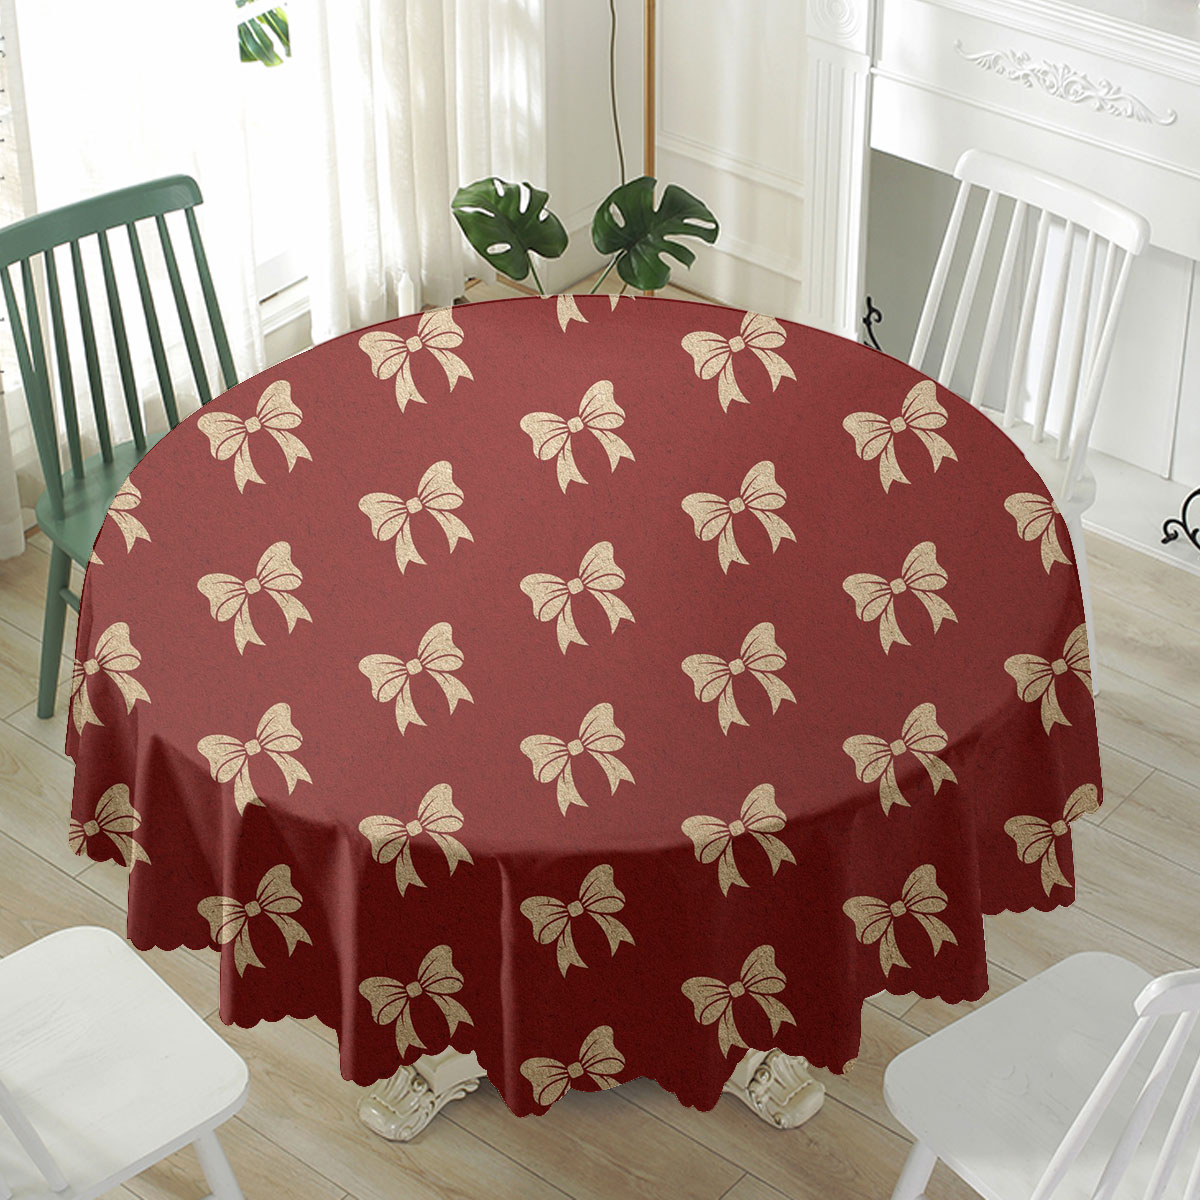 Christmas Bow, Christmas Tree Bows On Red Waterproof Tablecloth